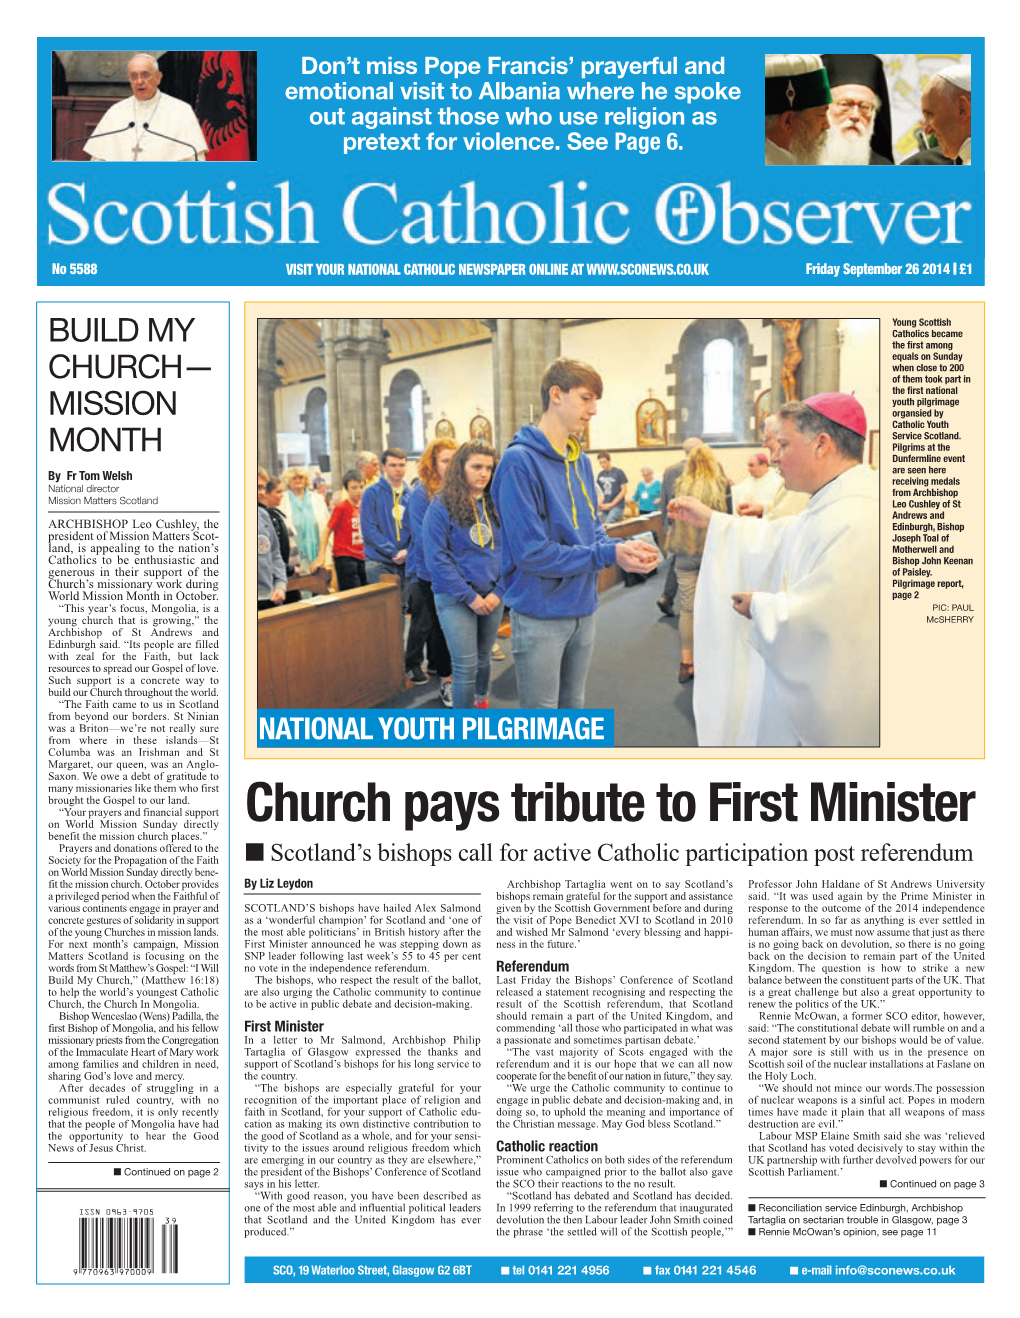 Church Pays Tribute to First Minister